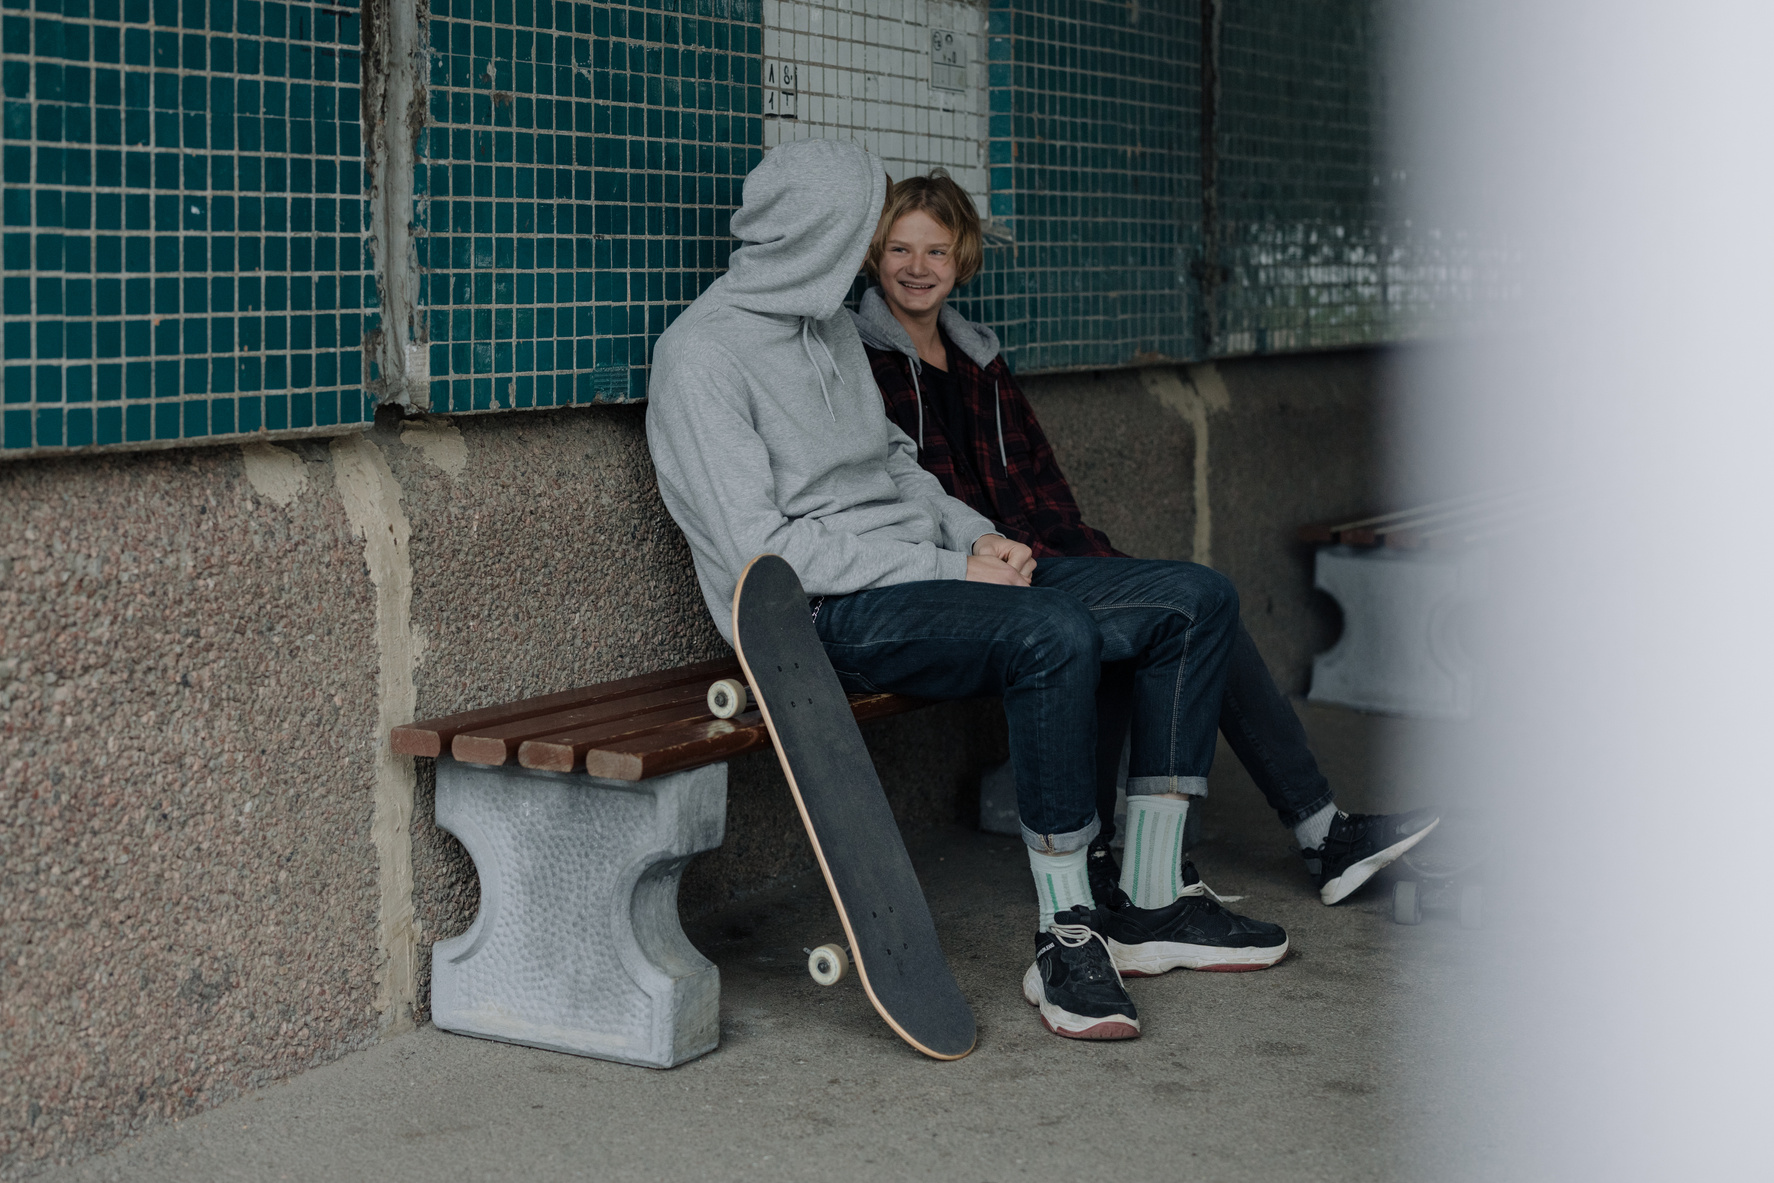 Two People Talking While Sitting on Bench